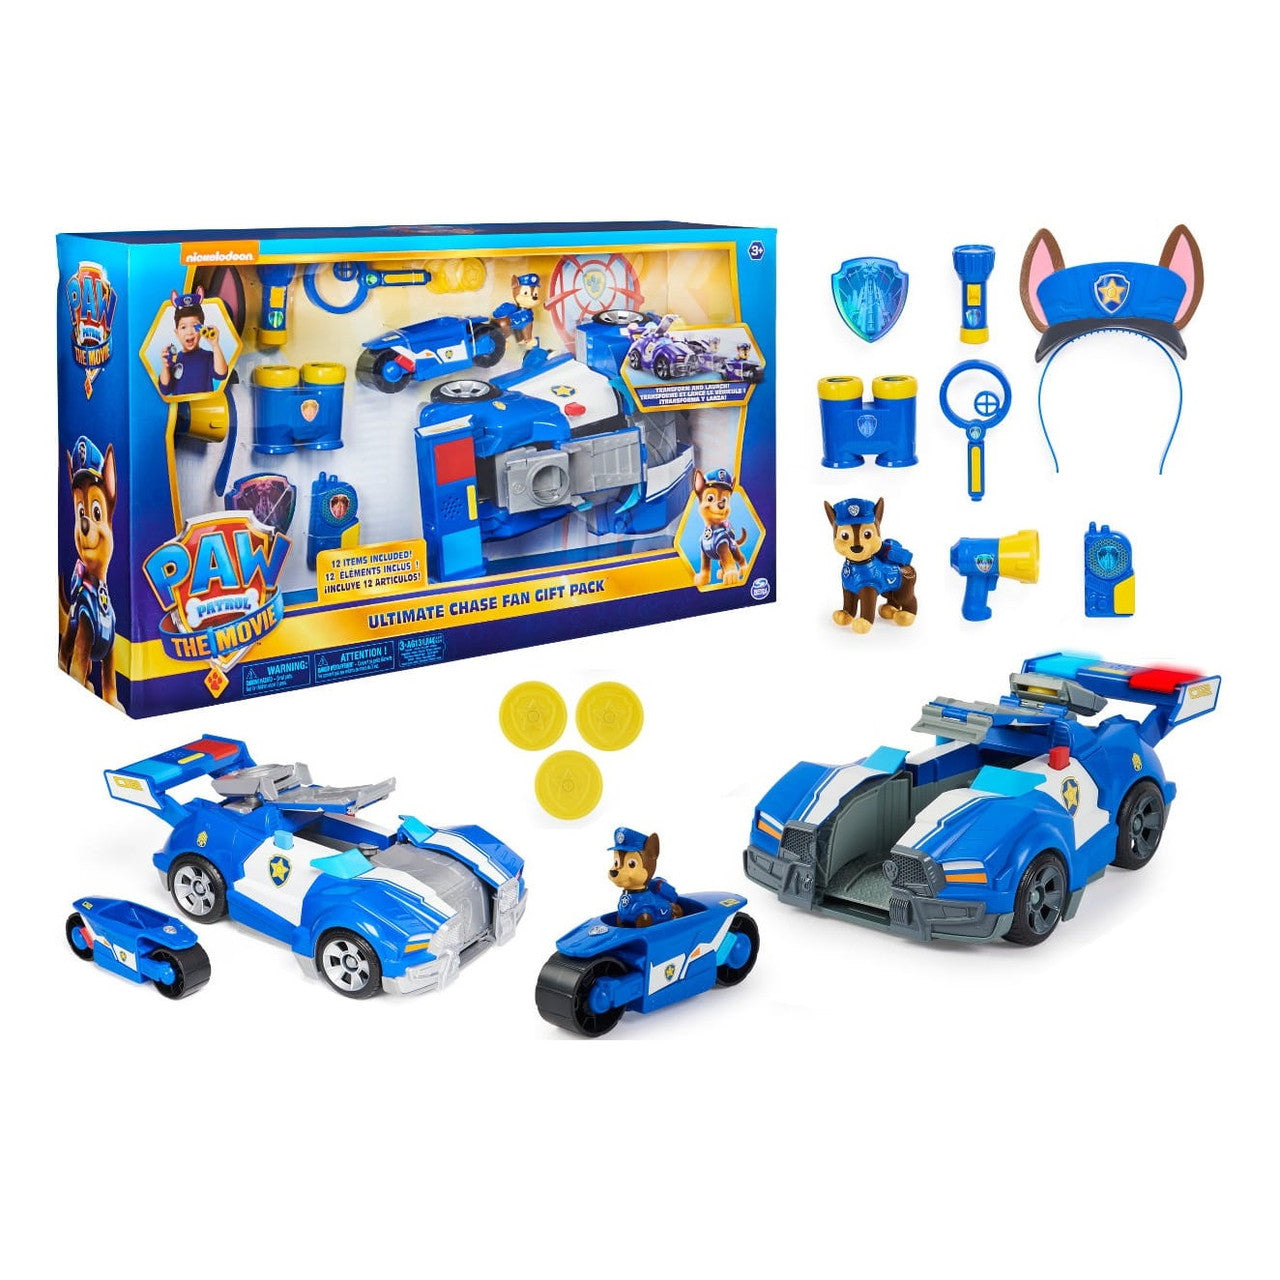 Paw Patrol Movie Ultimate Chase Fan Gift Pack